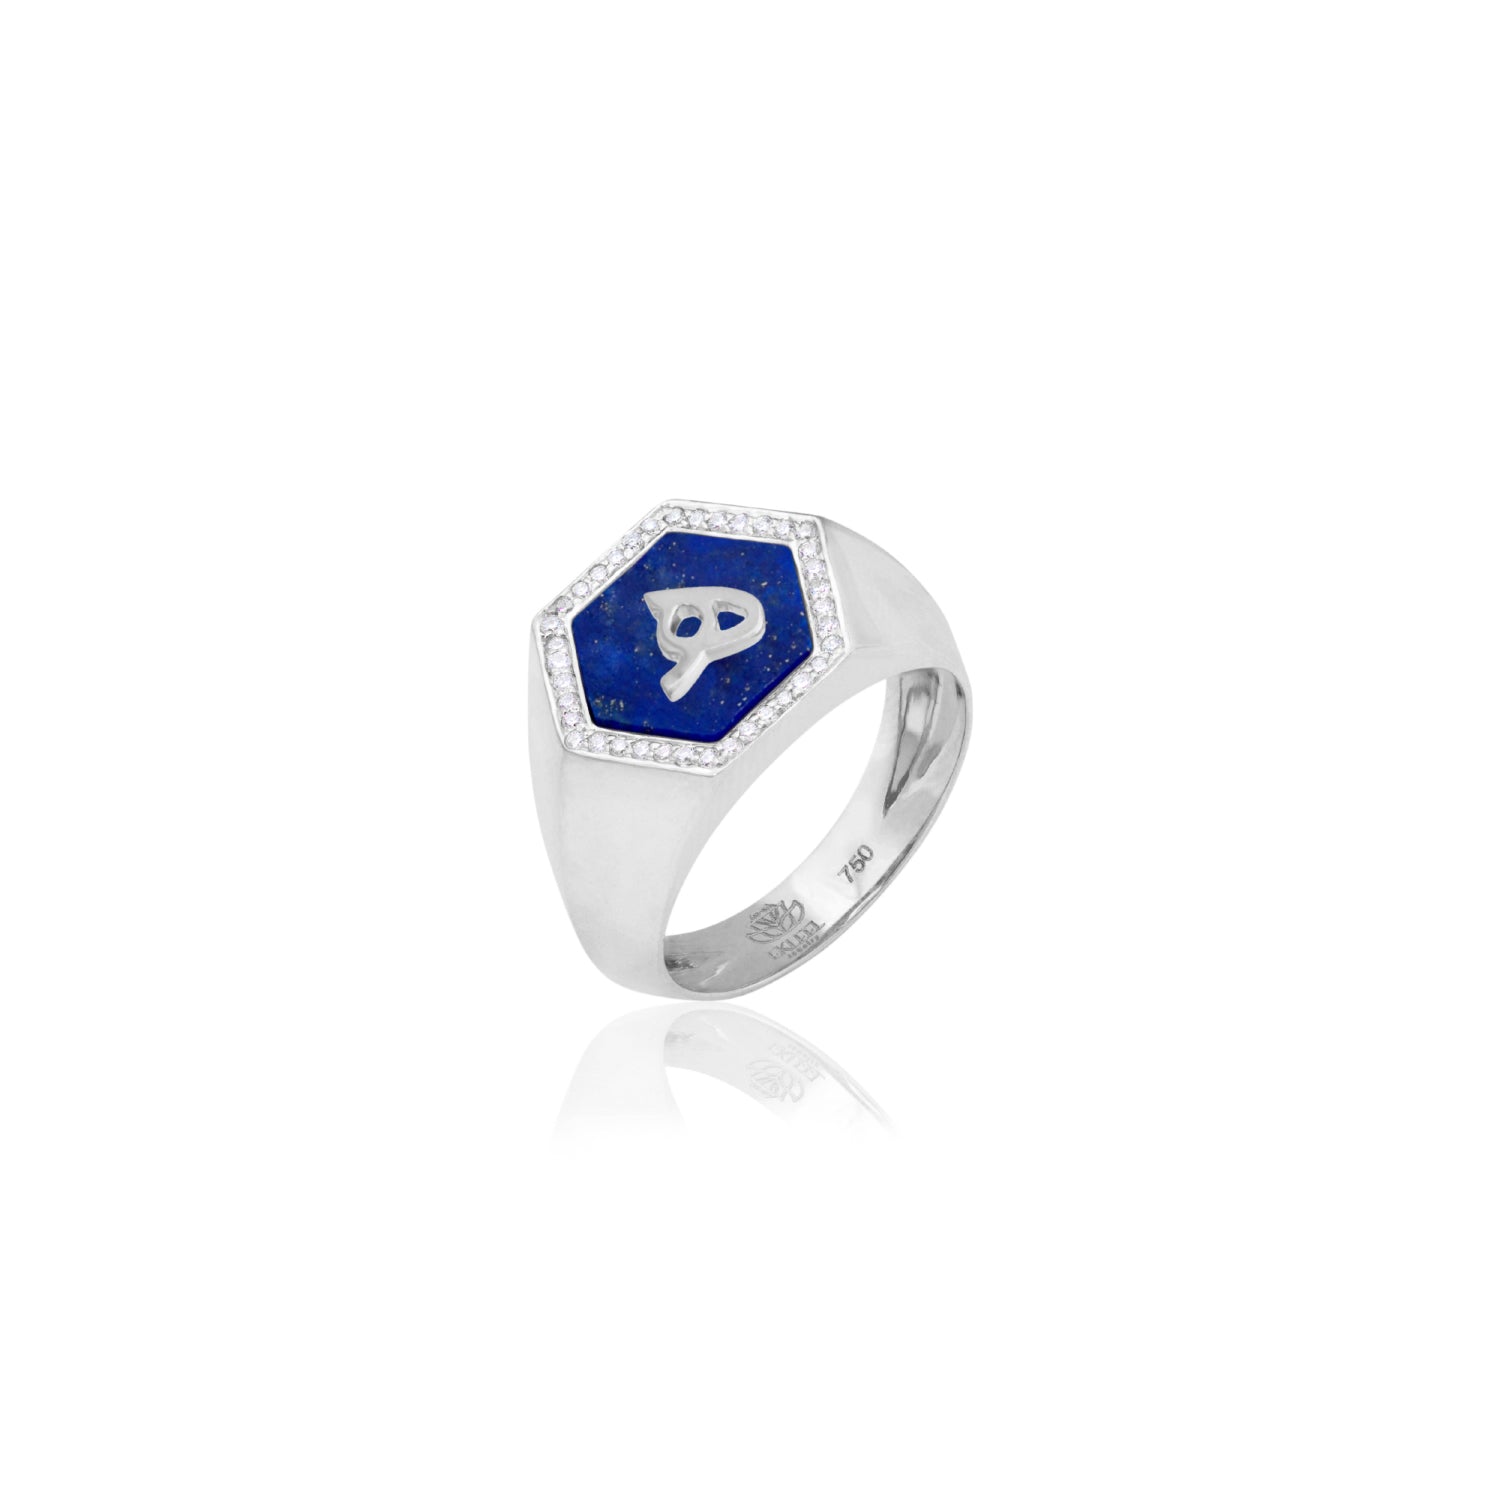 Qamoos 2.0 Letter هـ Lapis Lazuli and Diamond Signet Ring in White Gold